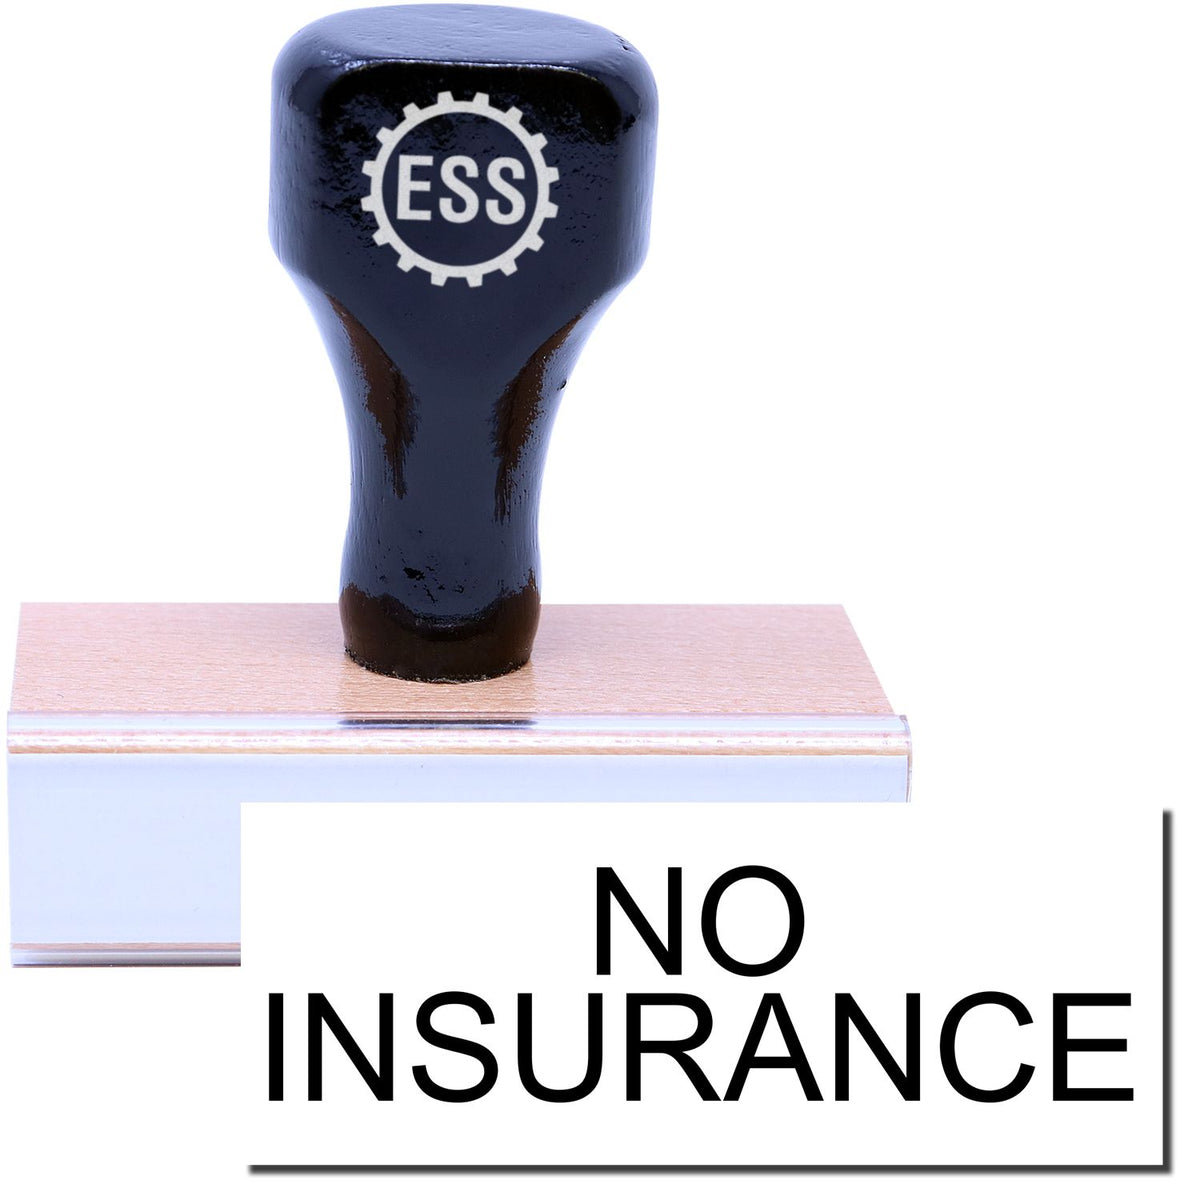 A stock office rubber stamp with a stamped image showing how the text &quot;NO INSURANCE&quot; in a large font is displayed after stamping.